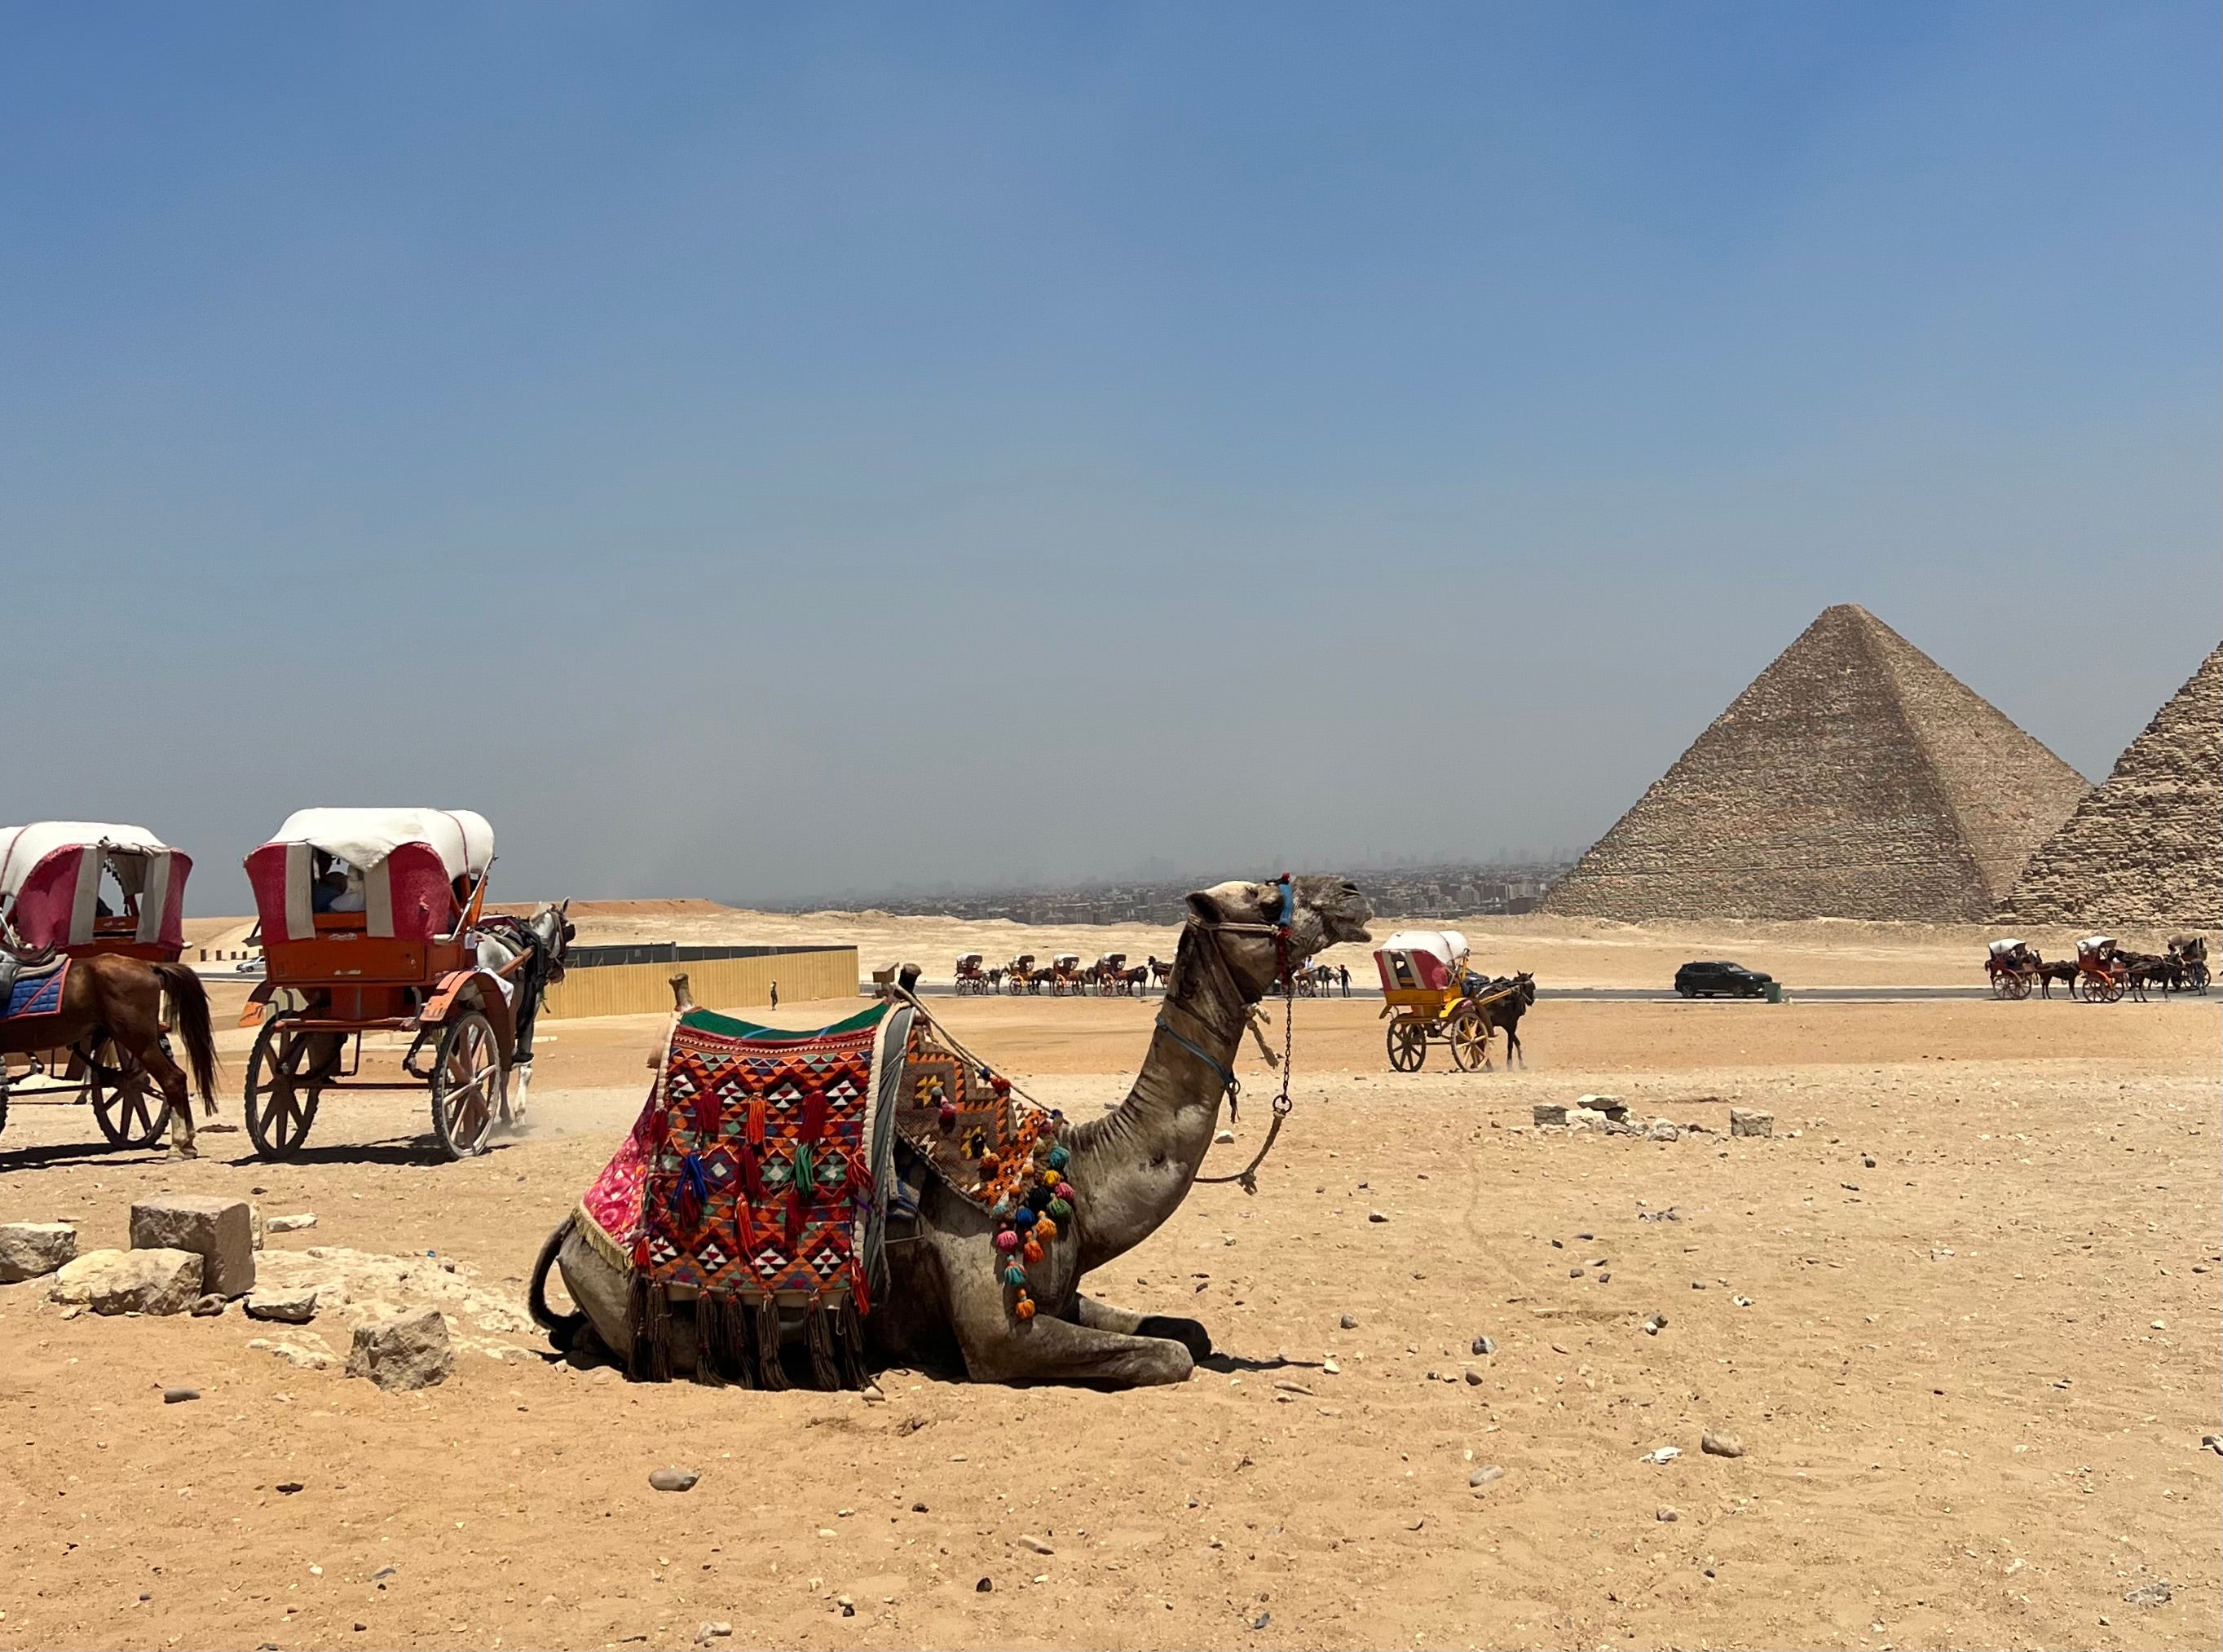 A camel takes rest near the Great Pyramid of Giza